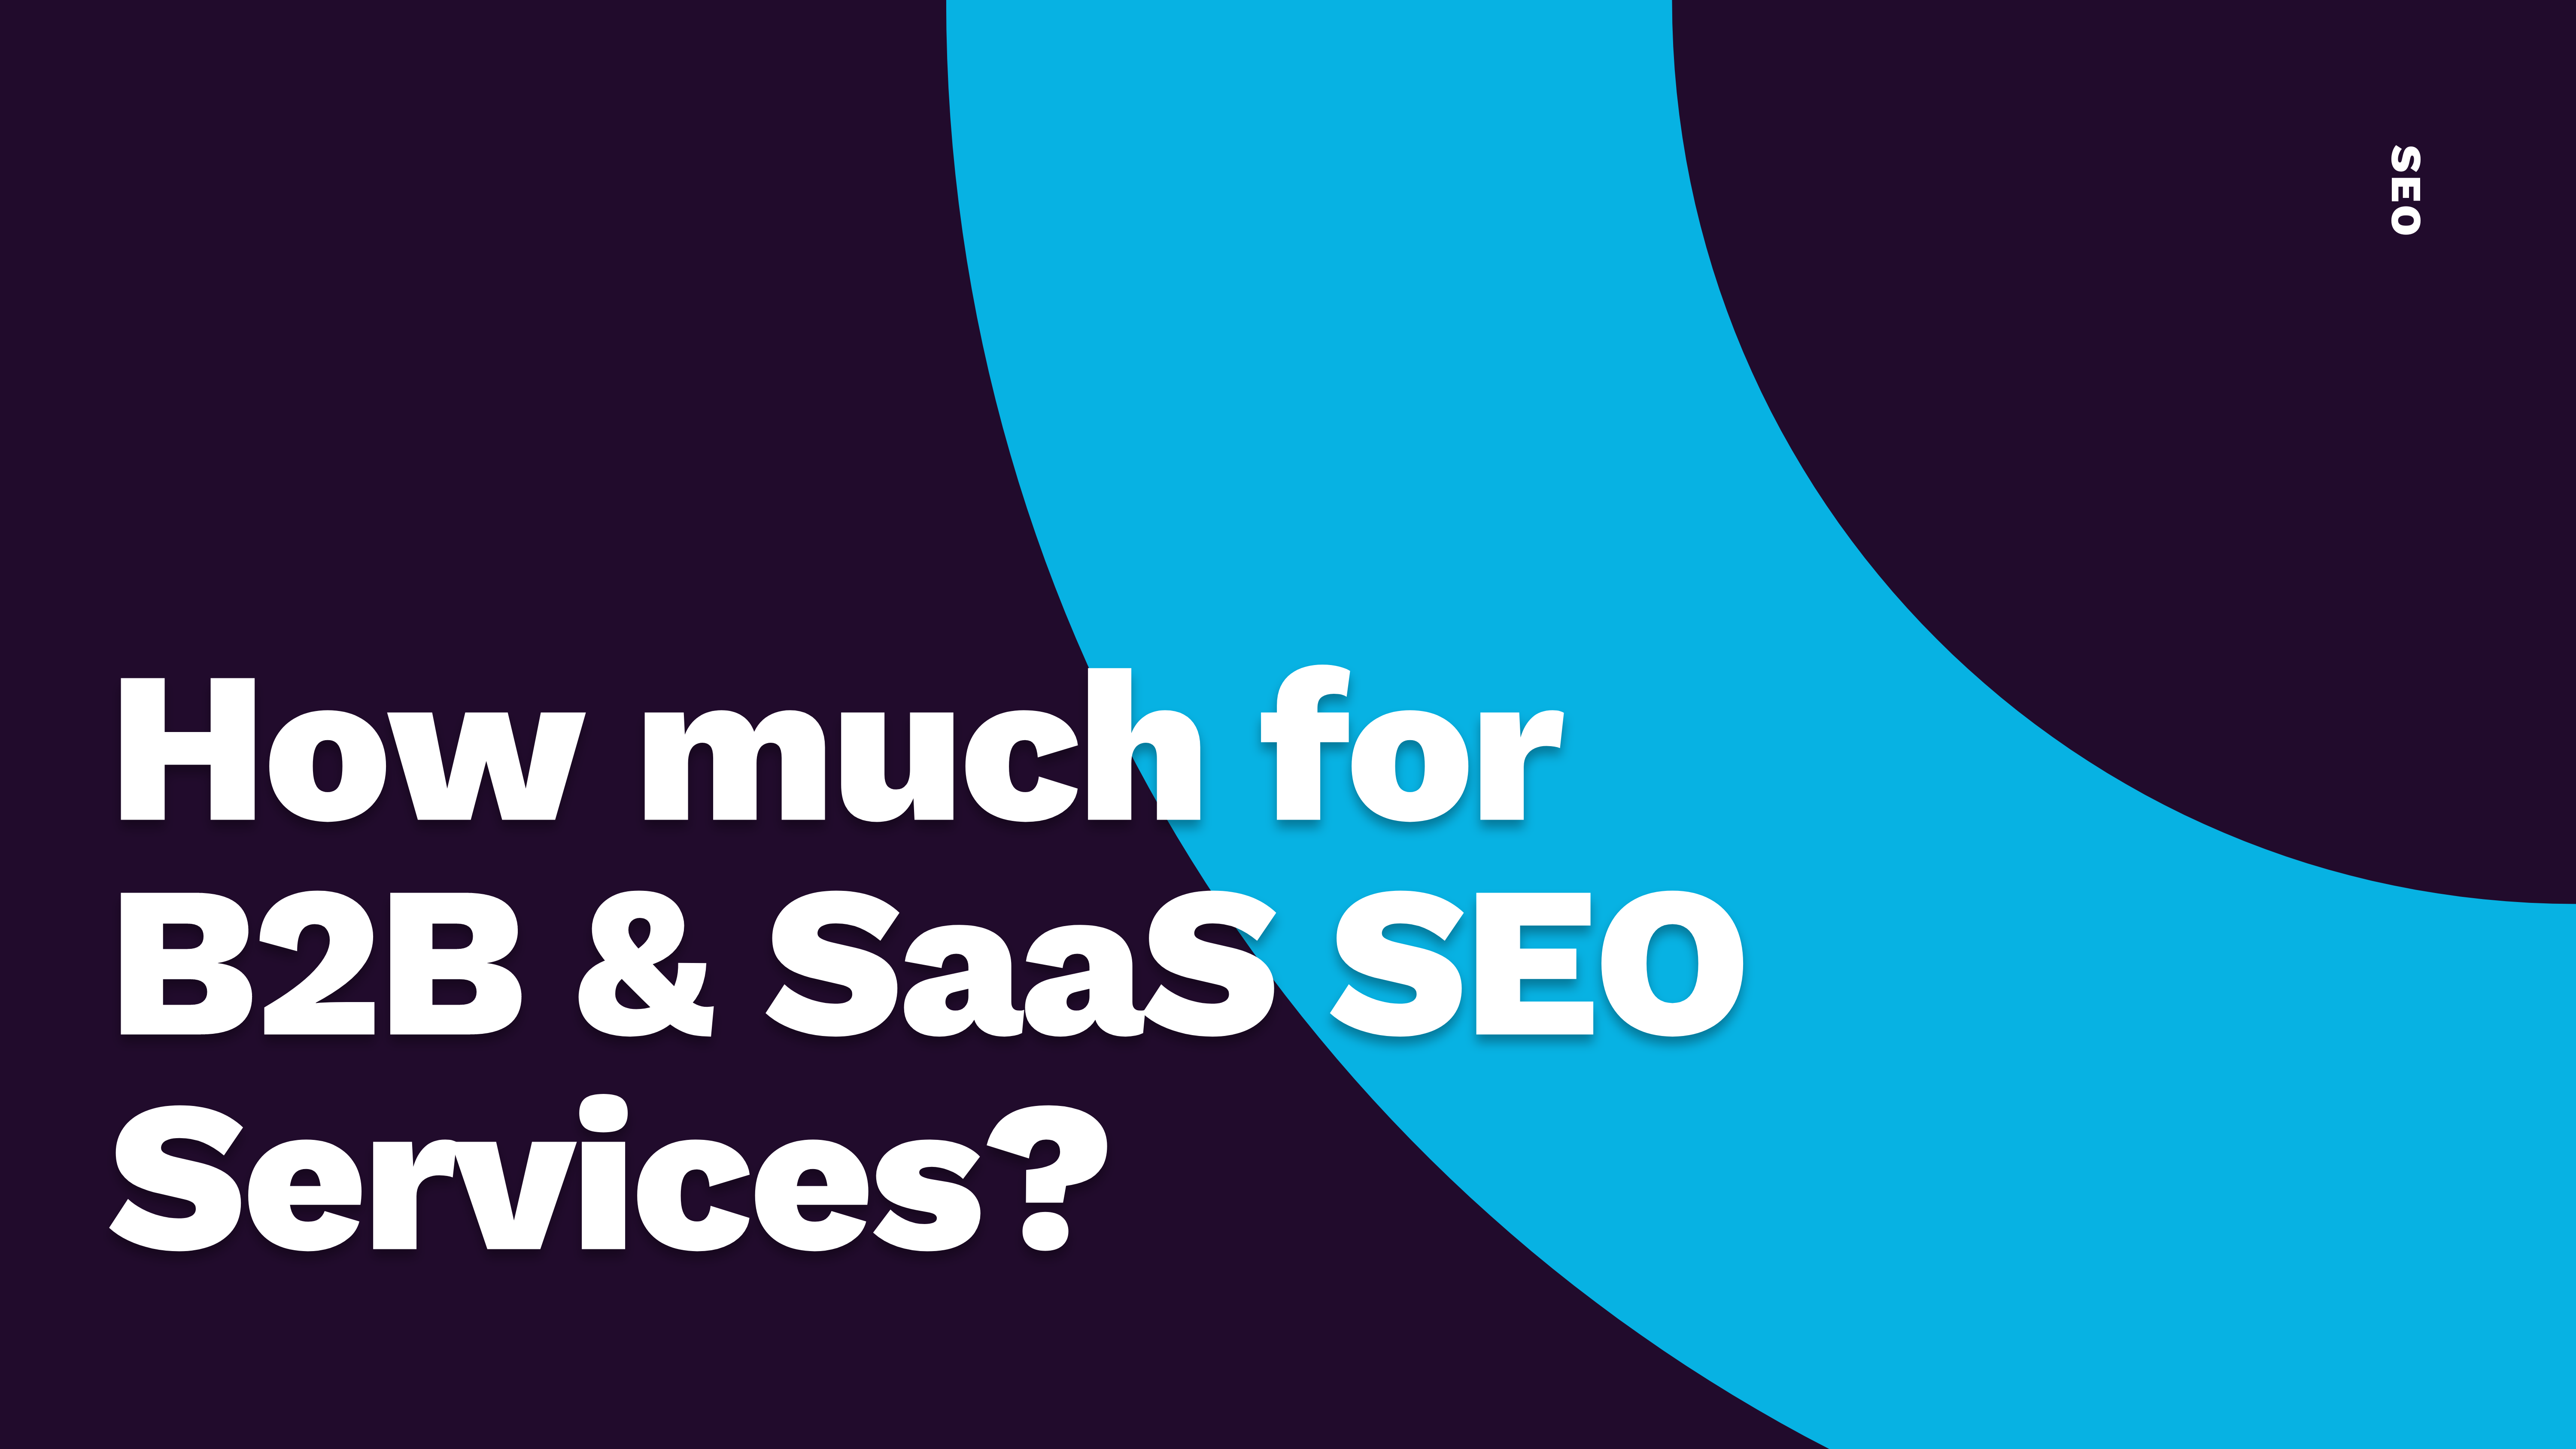 How Much for B2B & SaaS SEO Services?